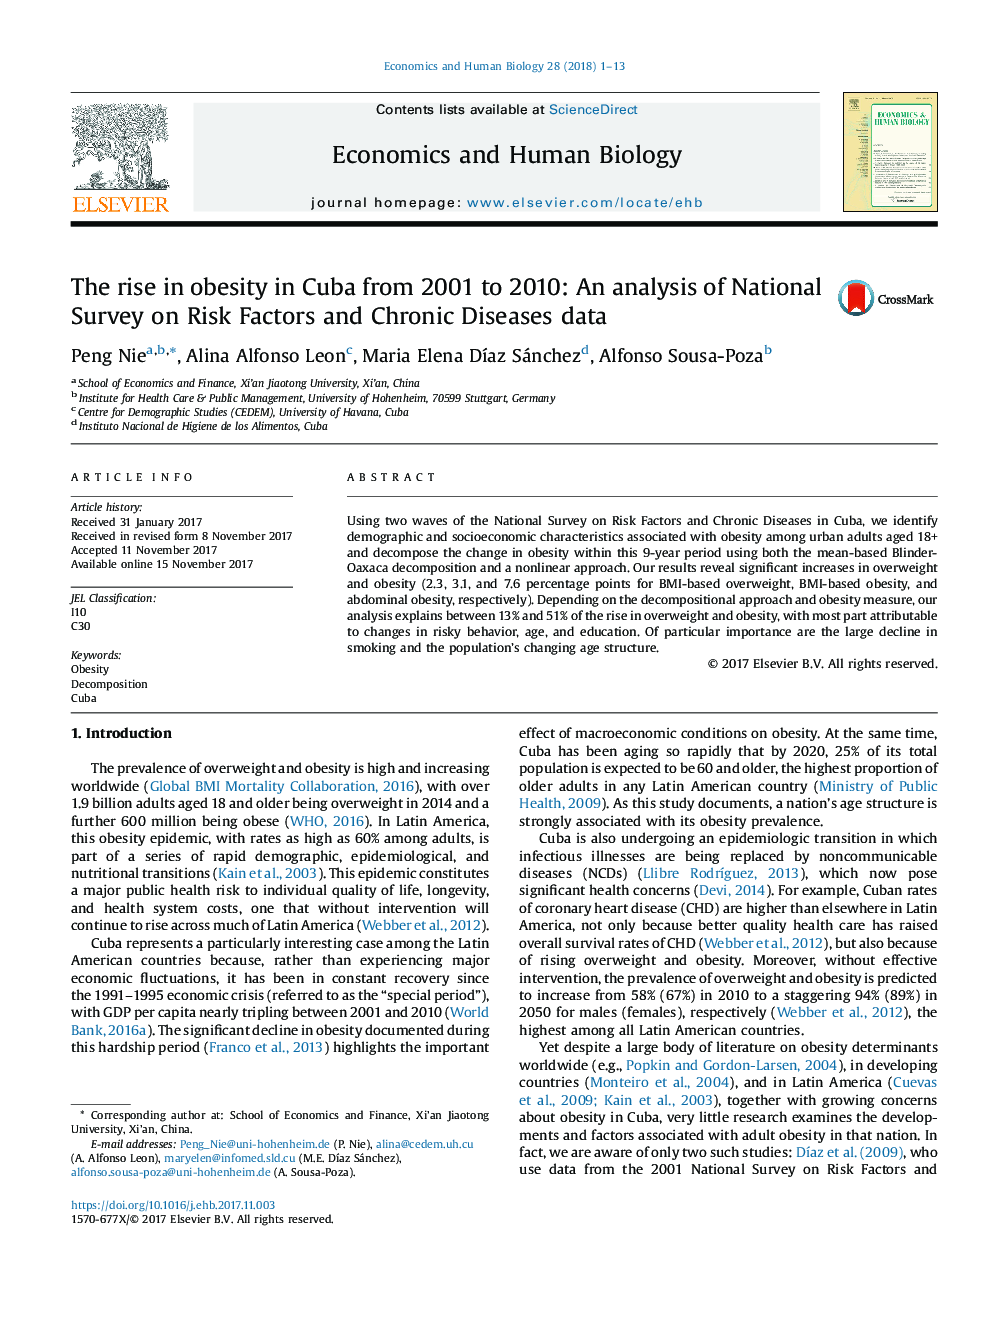 The rise in obesity in Cuba from 2001 to 2010: An analysis of National Survey on Risk Factors and Chronic Diseases data